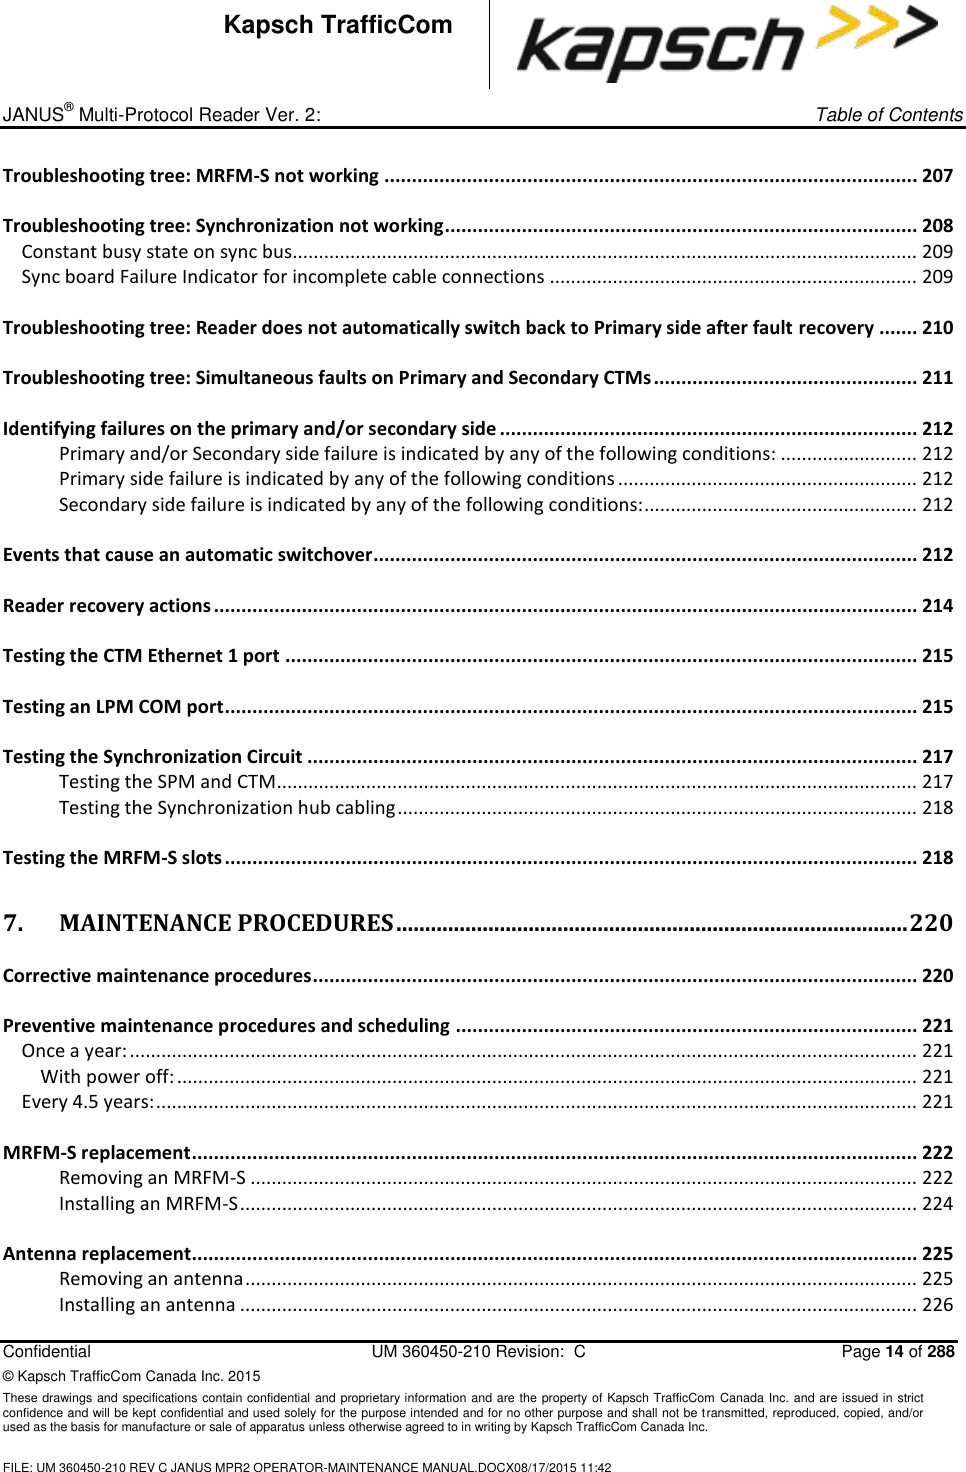 _ JANUS® Multi-Protocol Reader Ver. 2:     Table of Contents   Confidential  UM 360450-210 Revision:  C  Page 14 of 288 © Kapsch TrafficCom Canada Inc. 2015 These drawings and specifications contain confidential and proprietary information and are the property of Kapsch TrafficCom Canada Inc. and are issued in strict confidence and will be kept confidential and used solely for the purpose intended and for no other purpose and shall not be transmitted, reproduced, copied, and/or used as the basis for manufacture or sale of apparatus unless otherwise agreed to in writing by Kapsch TrafficCom Canada Inc.  FILE: UM 360450-210 REV C JANUS MPR2 OPERATOR-MAINTENANCE MANUAL.DOCX08/17/2015 11:42  Kapsch TrafficCom Troubleshooting tree: MRFM-S not working ................................................................................................. 207 Troubleshooting tree: Synchronization not working ...................................................................................... 208 Constant busy state on sync bus....................................................................................................................... 209 Sync board Failure Indicator for incomplete cable connections ...................................................................... 209 Troubleshooting tree: Reader does not automatically switch back to Primary side after fault recovery ....... 210 Troubleshooting tree: Simultaneous faults on Primary and Secondary CTMs ................................................ 211 Identifying failures on the primary and/or secondary side ............................................................................ 212 Primary and/or Secondary side failure is indicated by any of the following conditions: .......................... 212 Primary side failure is indicated by any of the following conditions ......................................................... 212 Secondary side failure is indicated by any of the following conditions: .................................................... 212 Events that cause an automatic switchover................................................................................................... 212 Reader recovery actions ................................................................................................................................ 214 Testing the CTM Ethernet 1 port ................................................................................................................... 215 Testing an LPM COM port .............................................................................................................................. 215 Testing the Synchronization Circuit ............................................................................................................... 217 Testing the SPM and CTM.......................................................................................................................... 217 Testing the Synchronization hub cabling ................................................................................................... 218 Testing the MRFM-S slots .............................................................................................................................. 218 7. MAINTENANCE PROCEDURES ......................................................................................... 220 Corrective maintenance procedures .............................................................................................................. 220 Preventive maintenance procedures and scheduling .................................................................................... 221 Once a year: ...................................................................................................................................................... 221 With power off: ............................................................................................................................................. 221 Every 4.5 years: ................................................................................................................................................. 221 MRFM-S replacement .................................................................................................................................... 222 Removing an MRFM-S ............................................................................................................................... 222 Installing an MRFM-S ................................................................................................................................. 224 Antenna replacement .................................................................................................................................... 225 Removing an antenna ................................................................................................................................ 225 Installing an antenna ................................................................................................................................. 226 